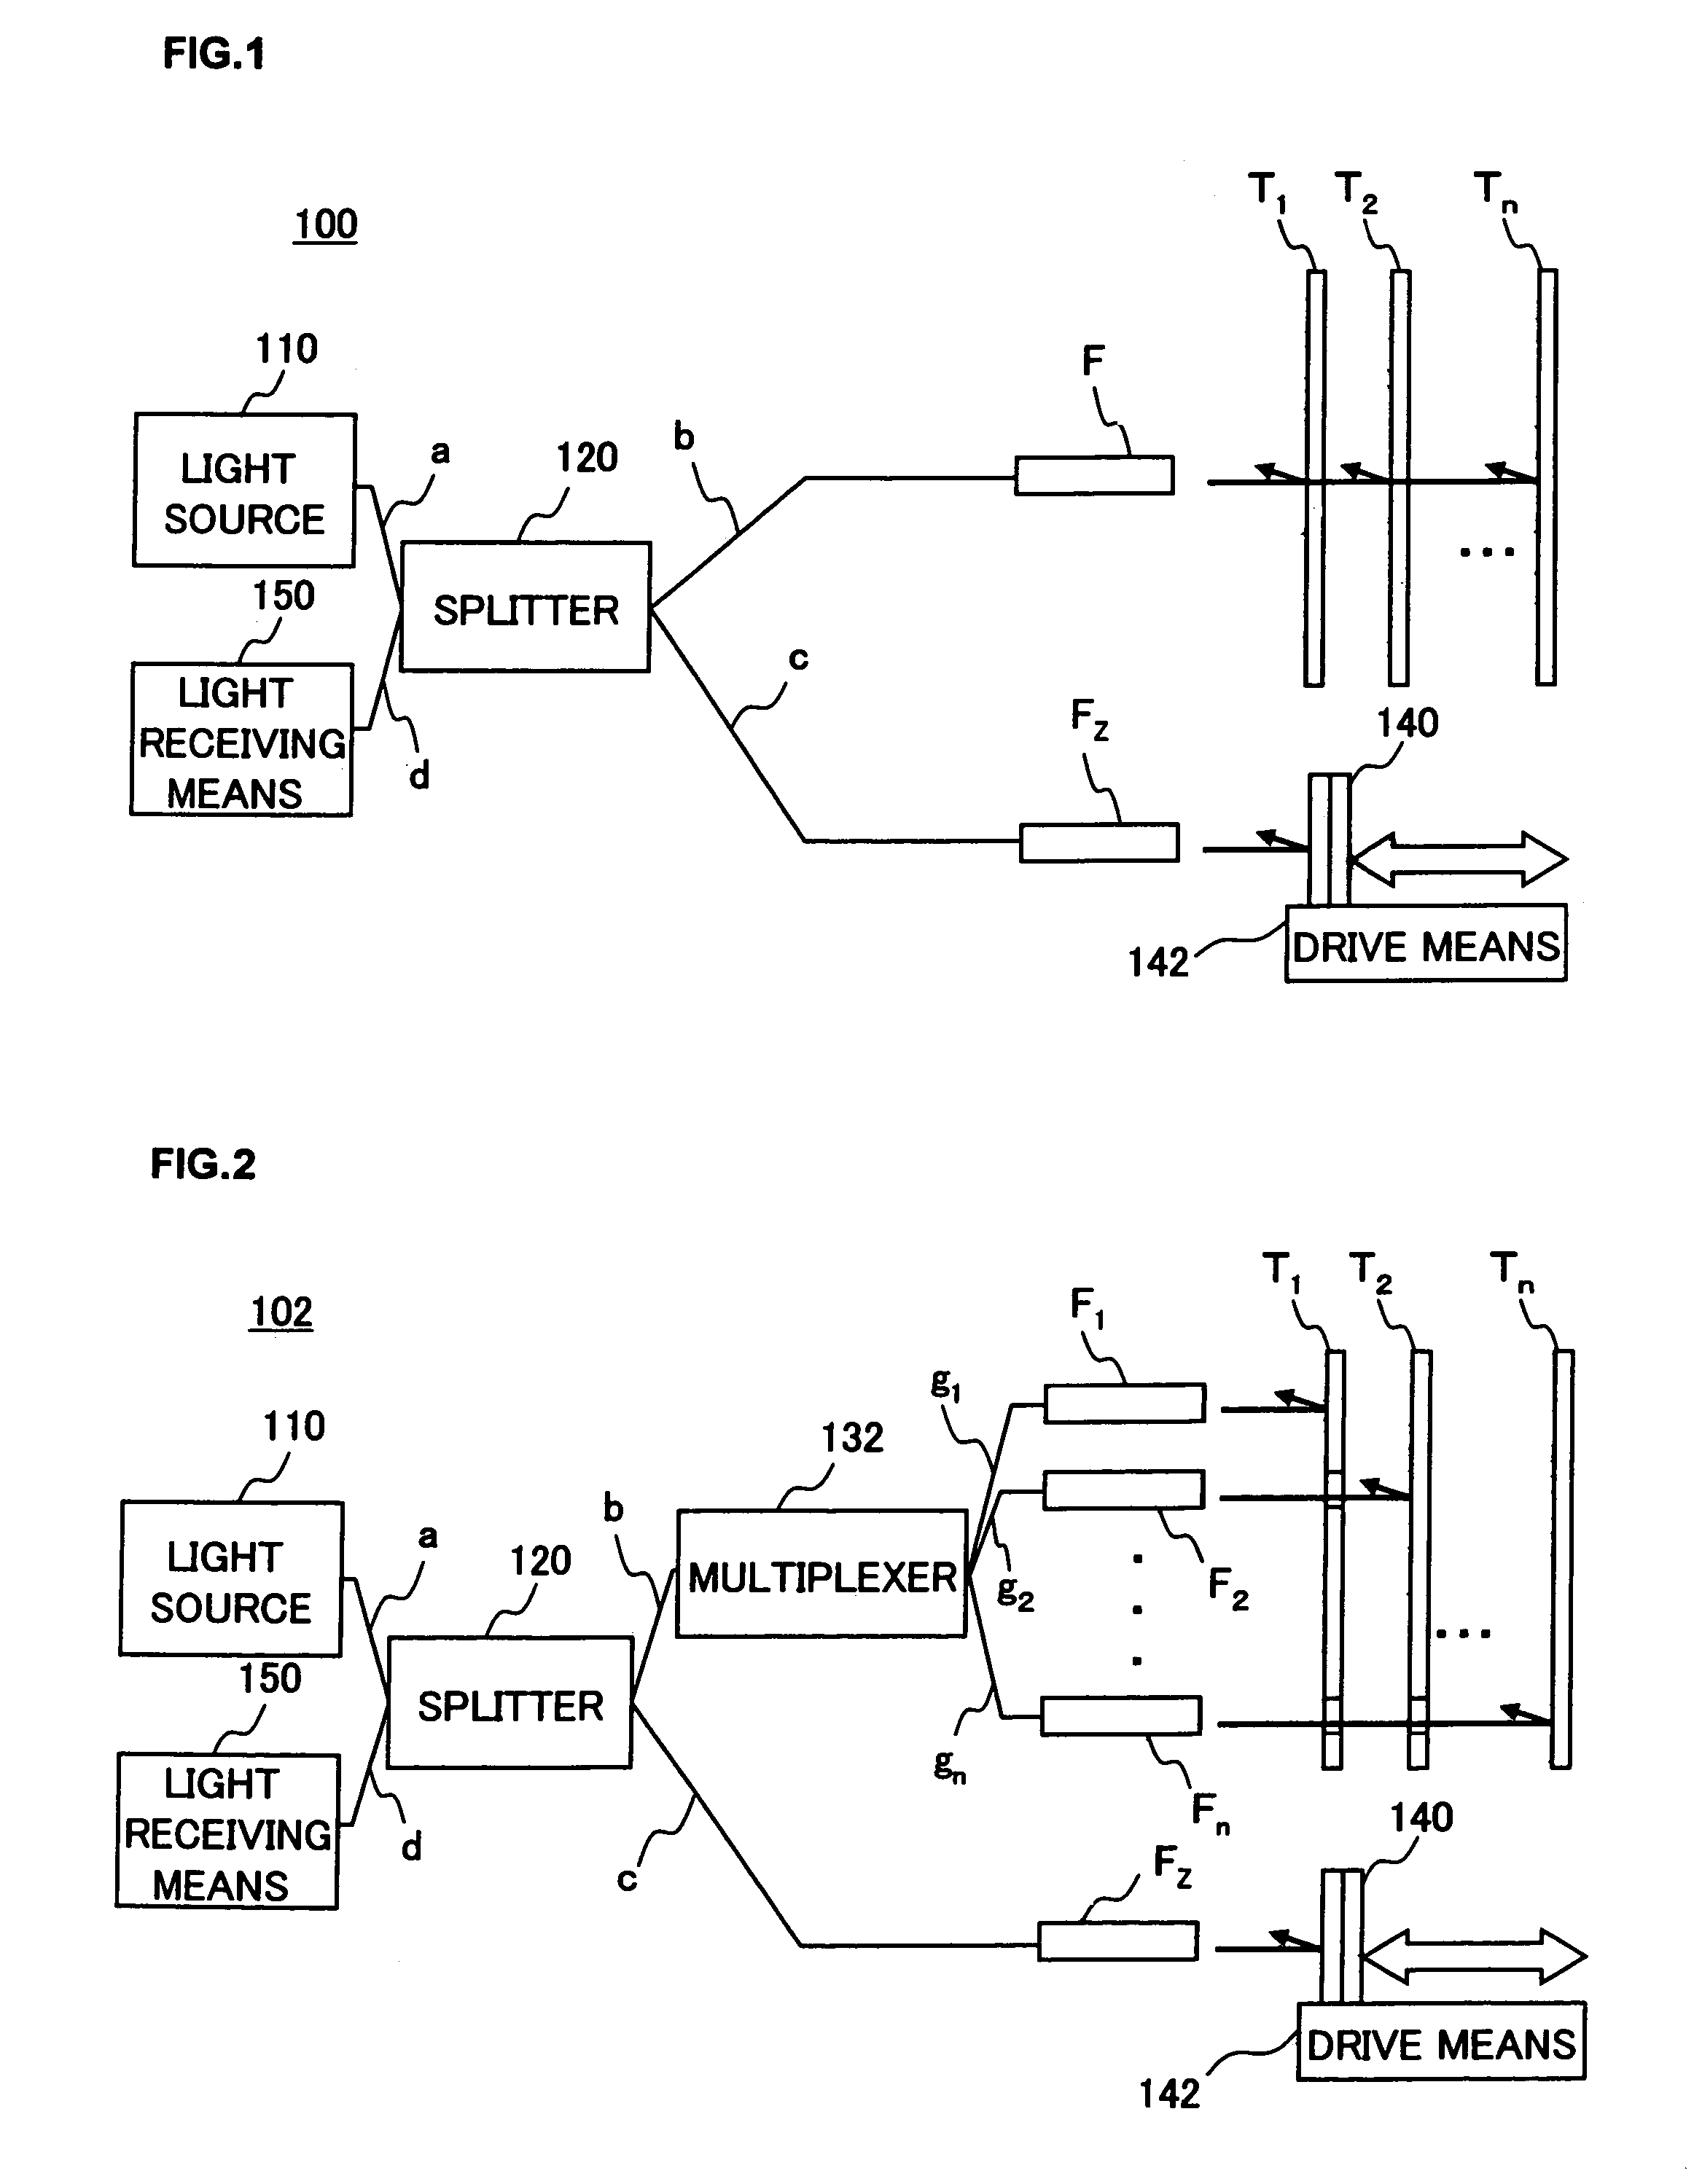 System, apparatus, and method for determining temperature/thickness of an object using light interference measurements